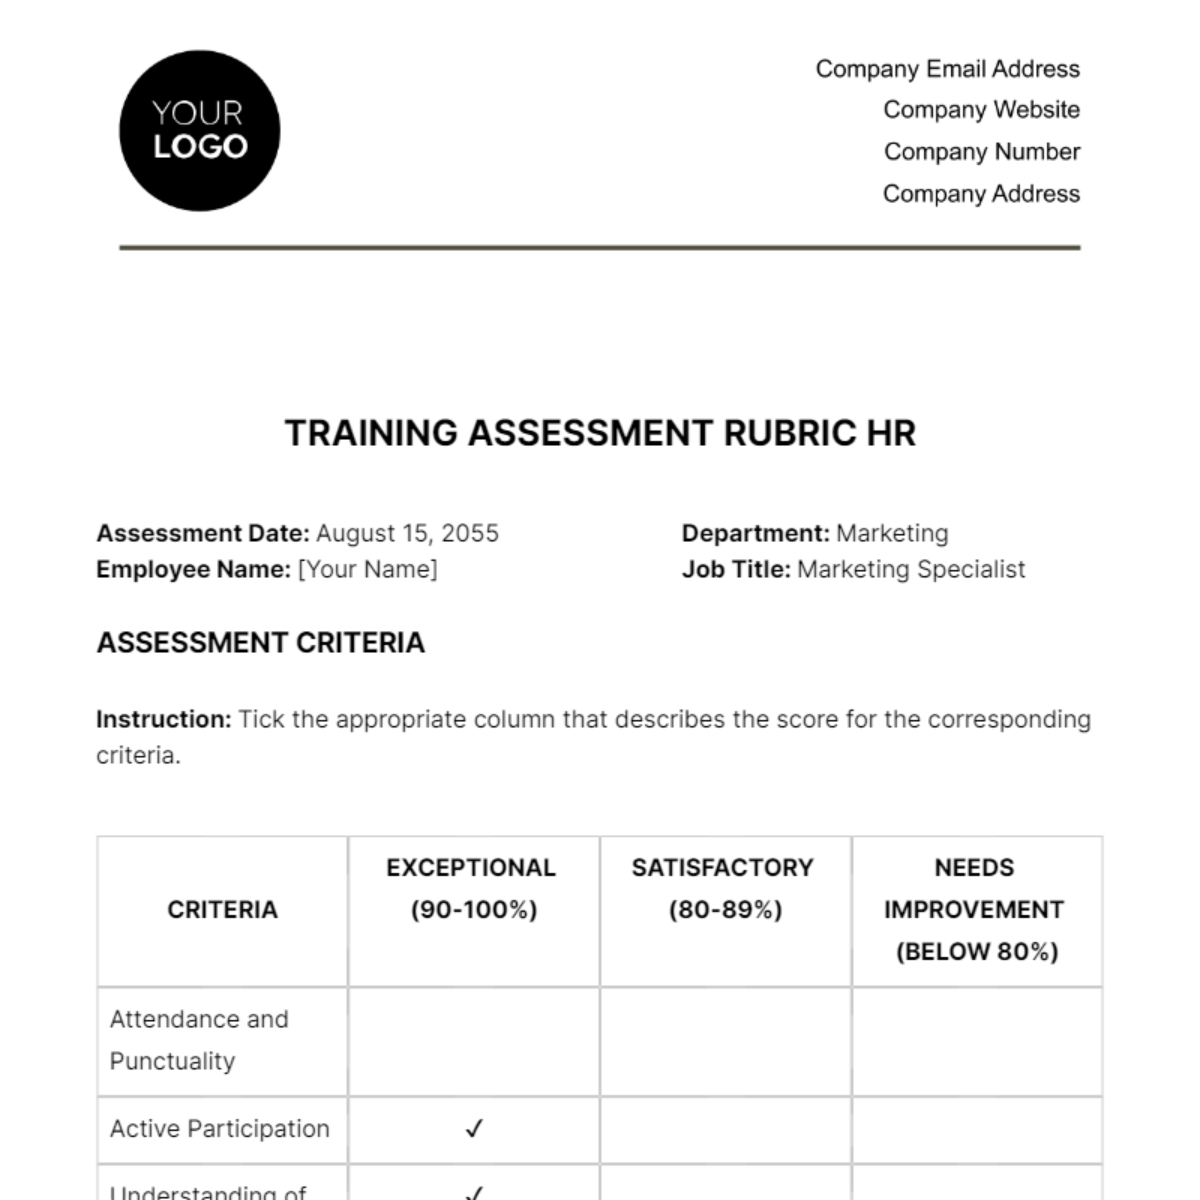 Free Training Assessment Rubric HR Template